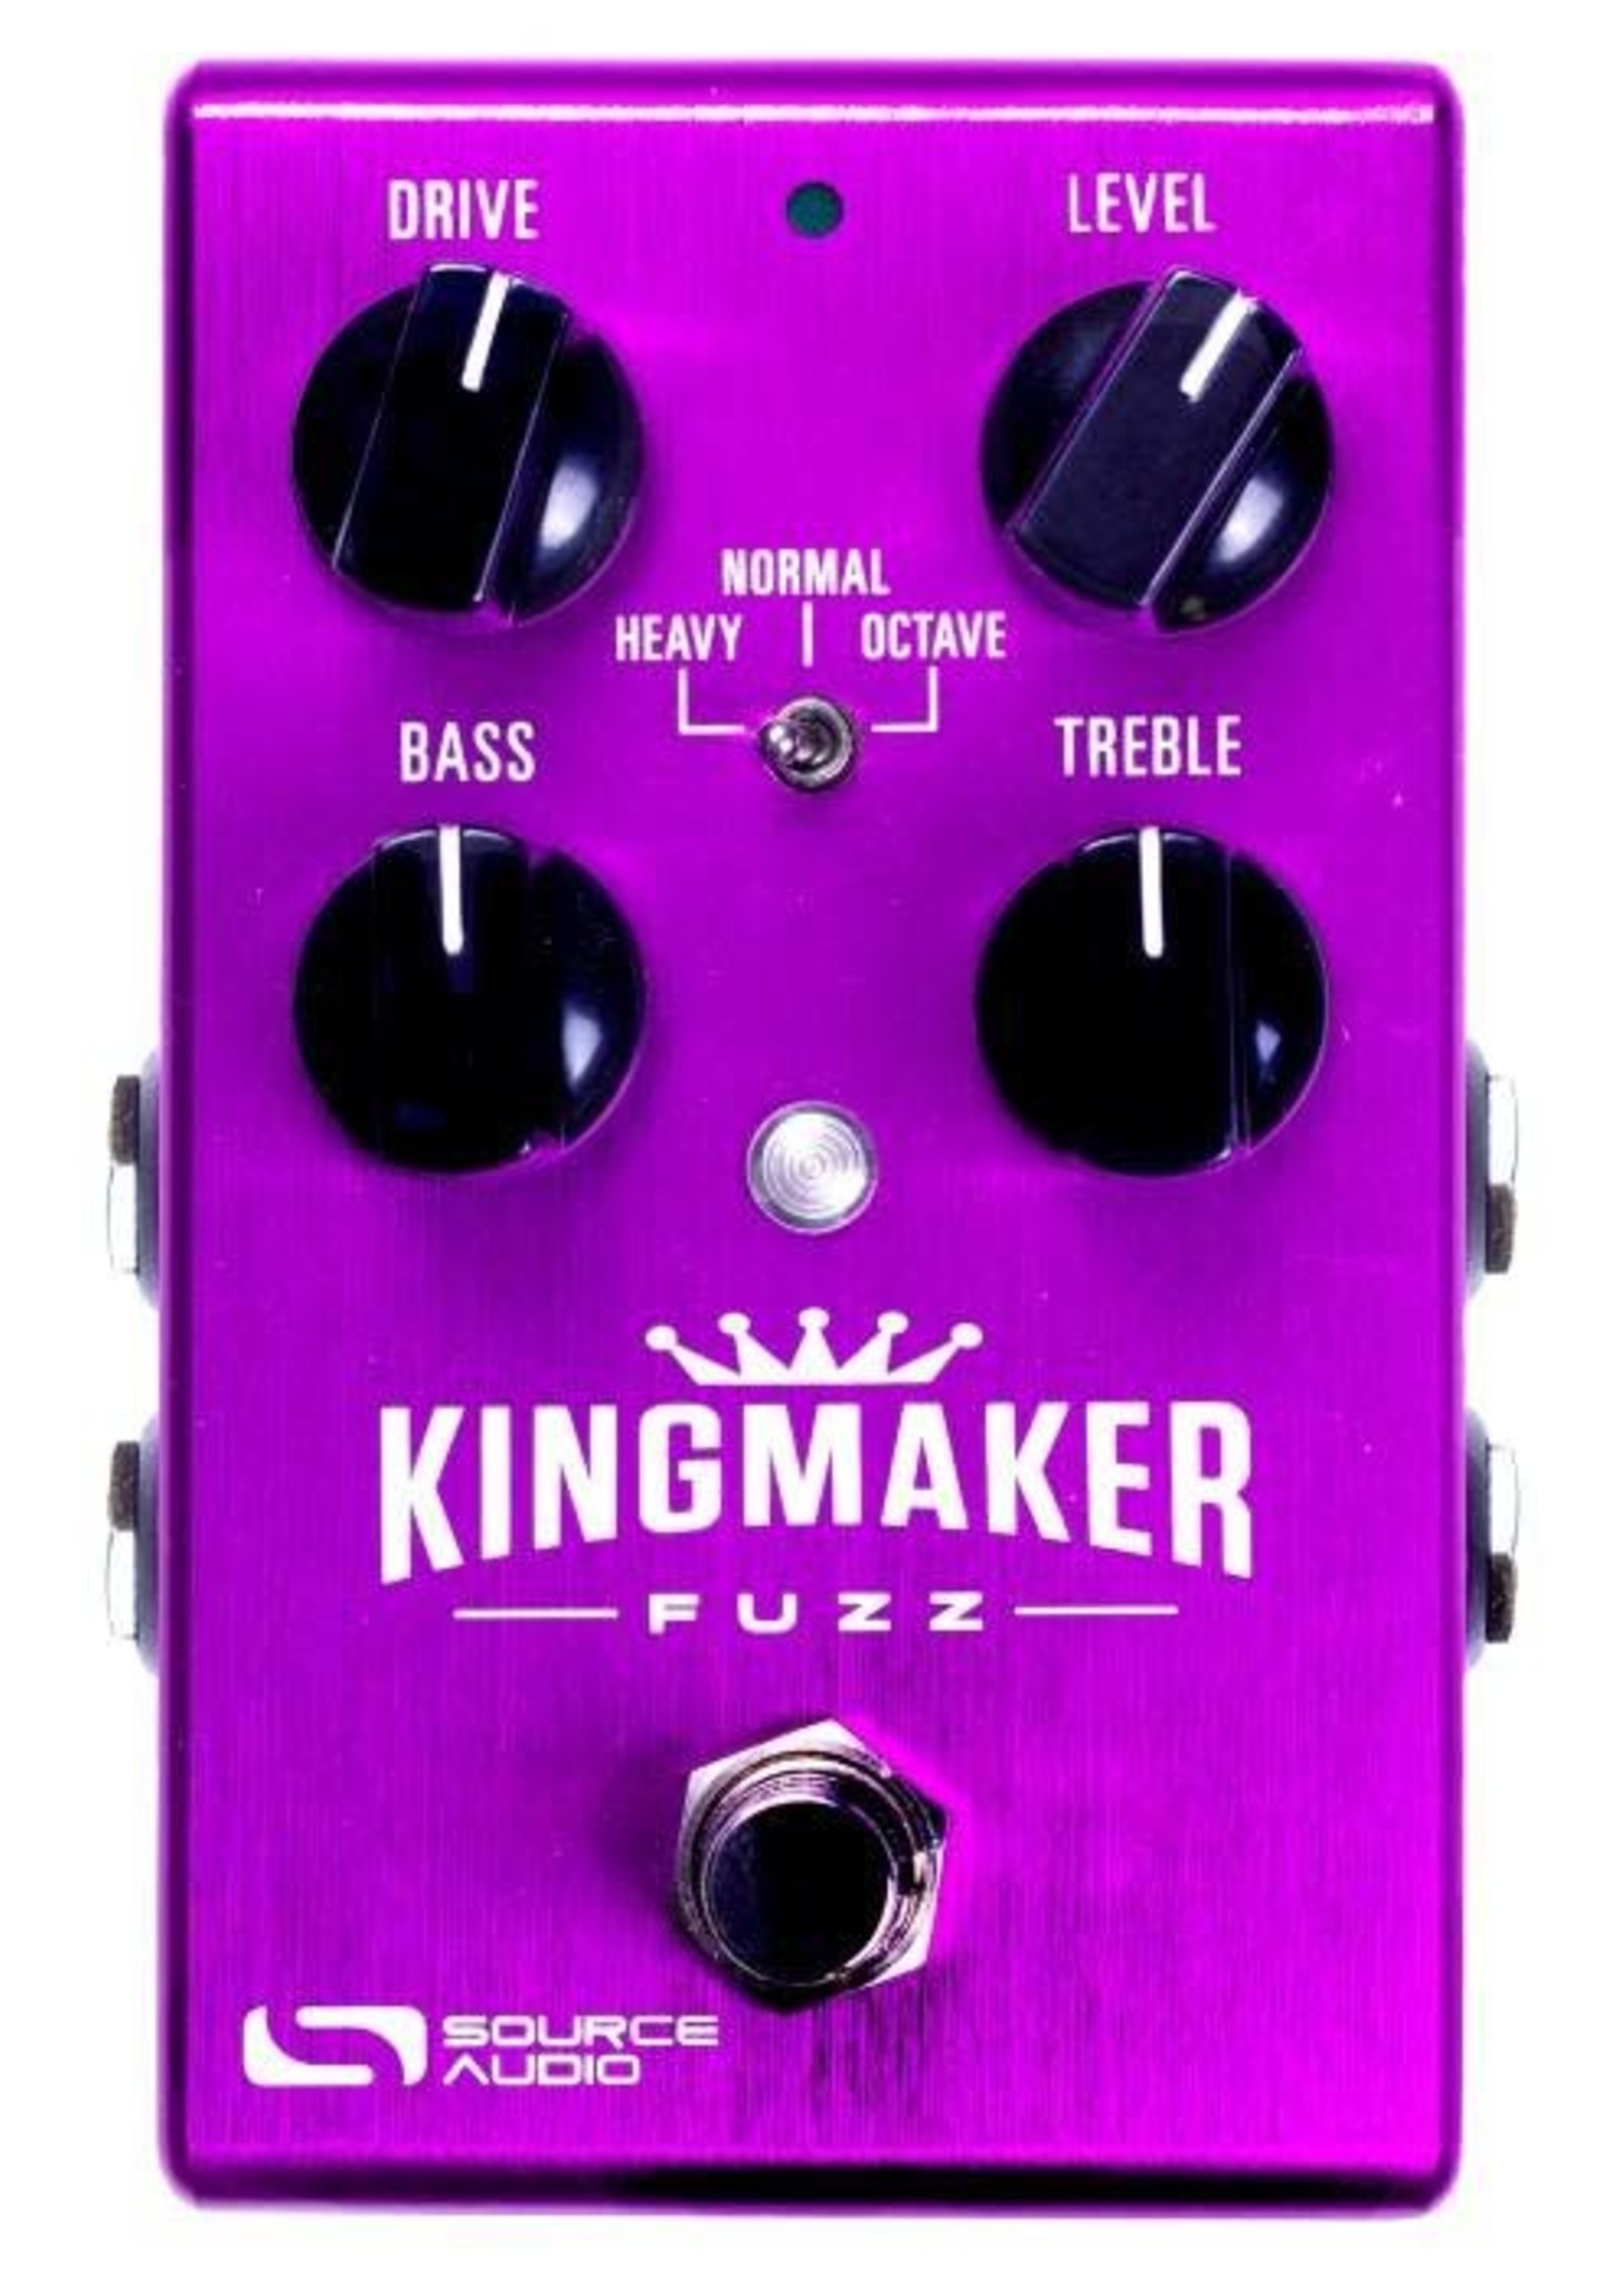 Source Audio Source Audio One Series Kingmaker Fuzz Effects Pedal